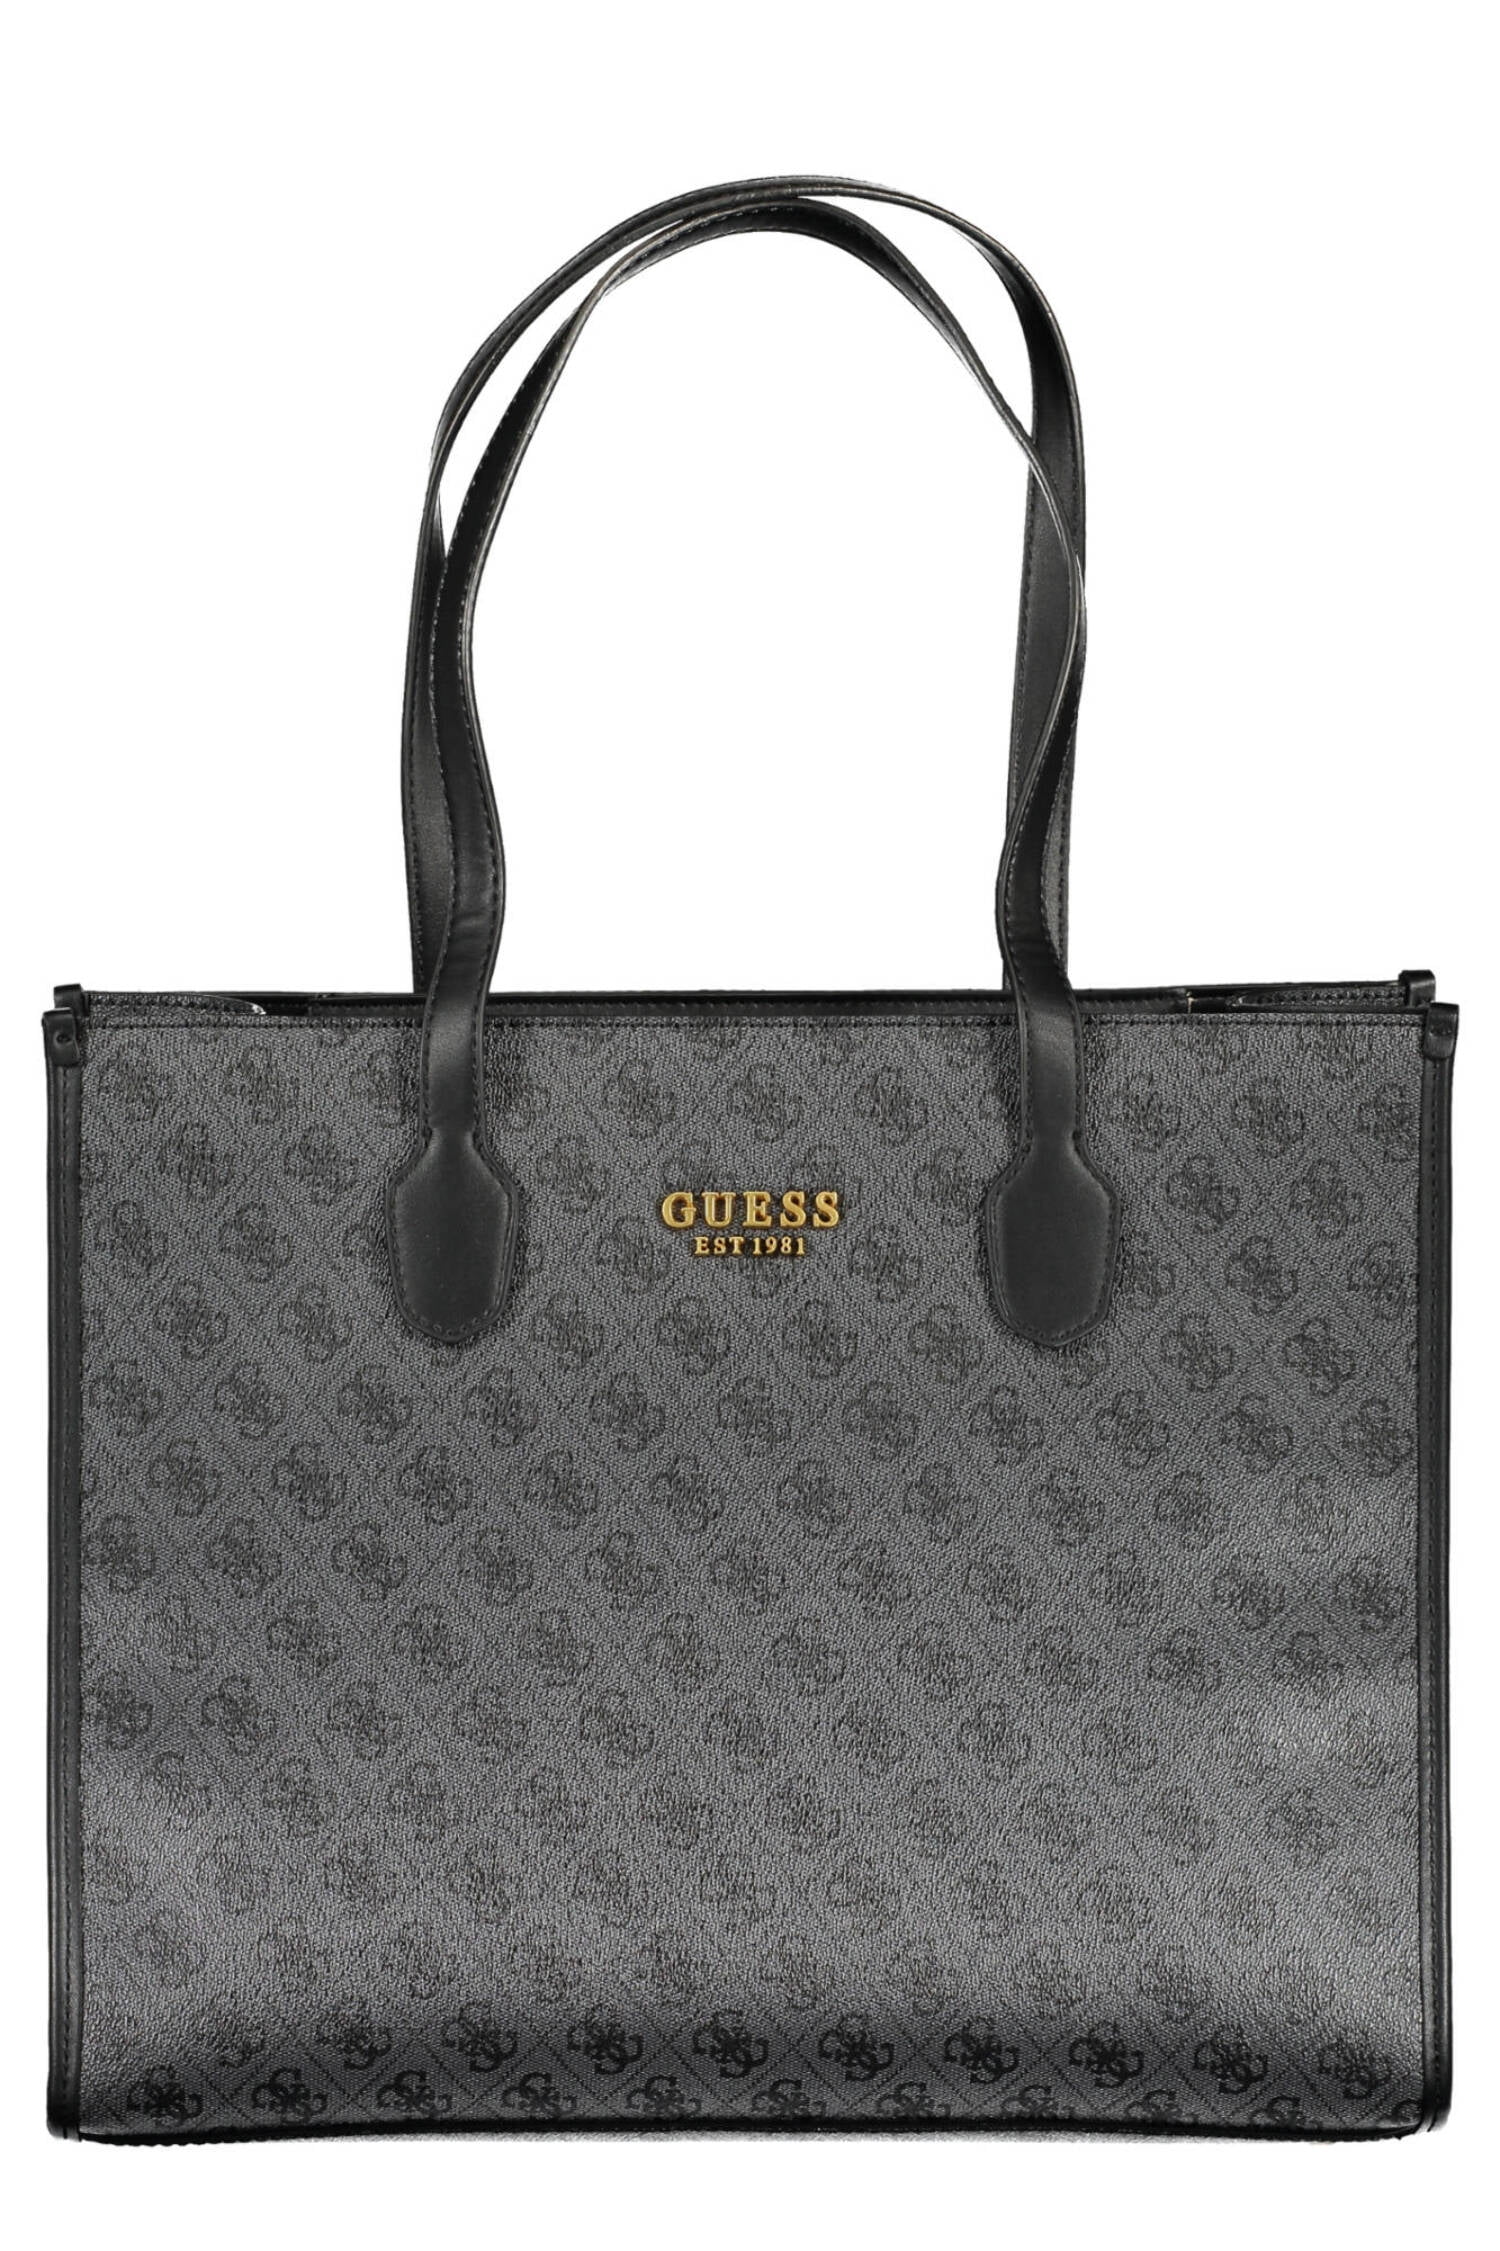 Buy Guess Women's Tote Bag (LZ669123_Black) at Amazon.in